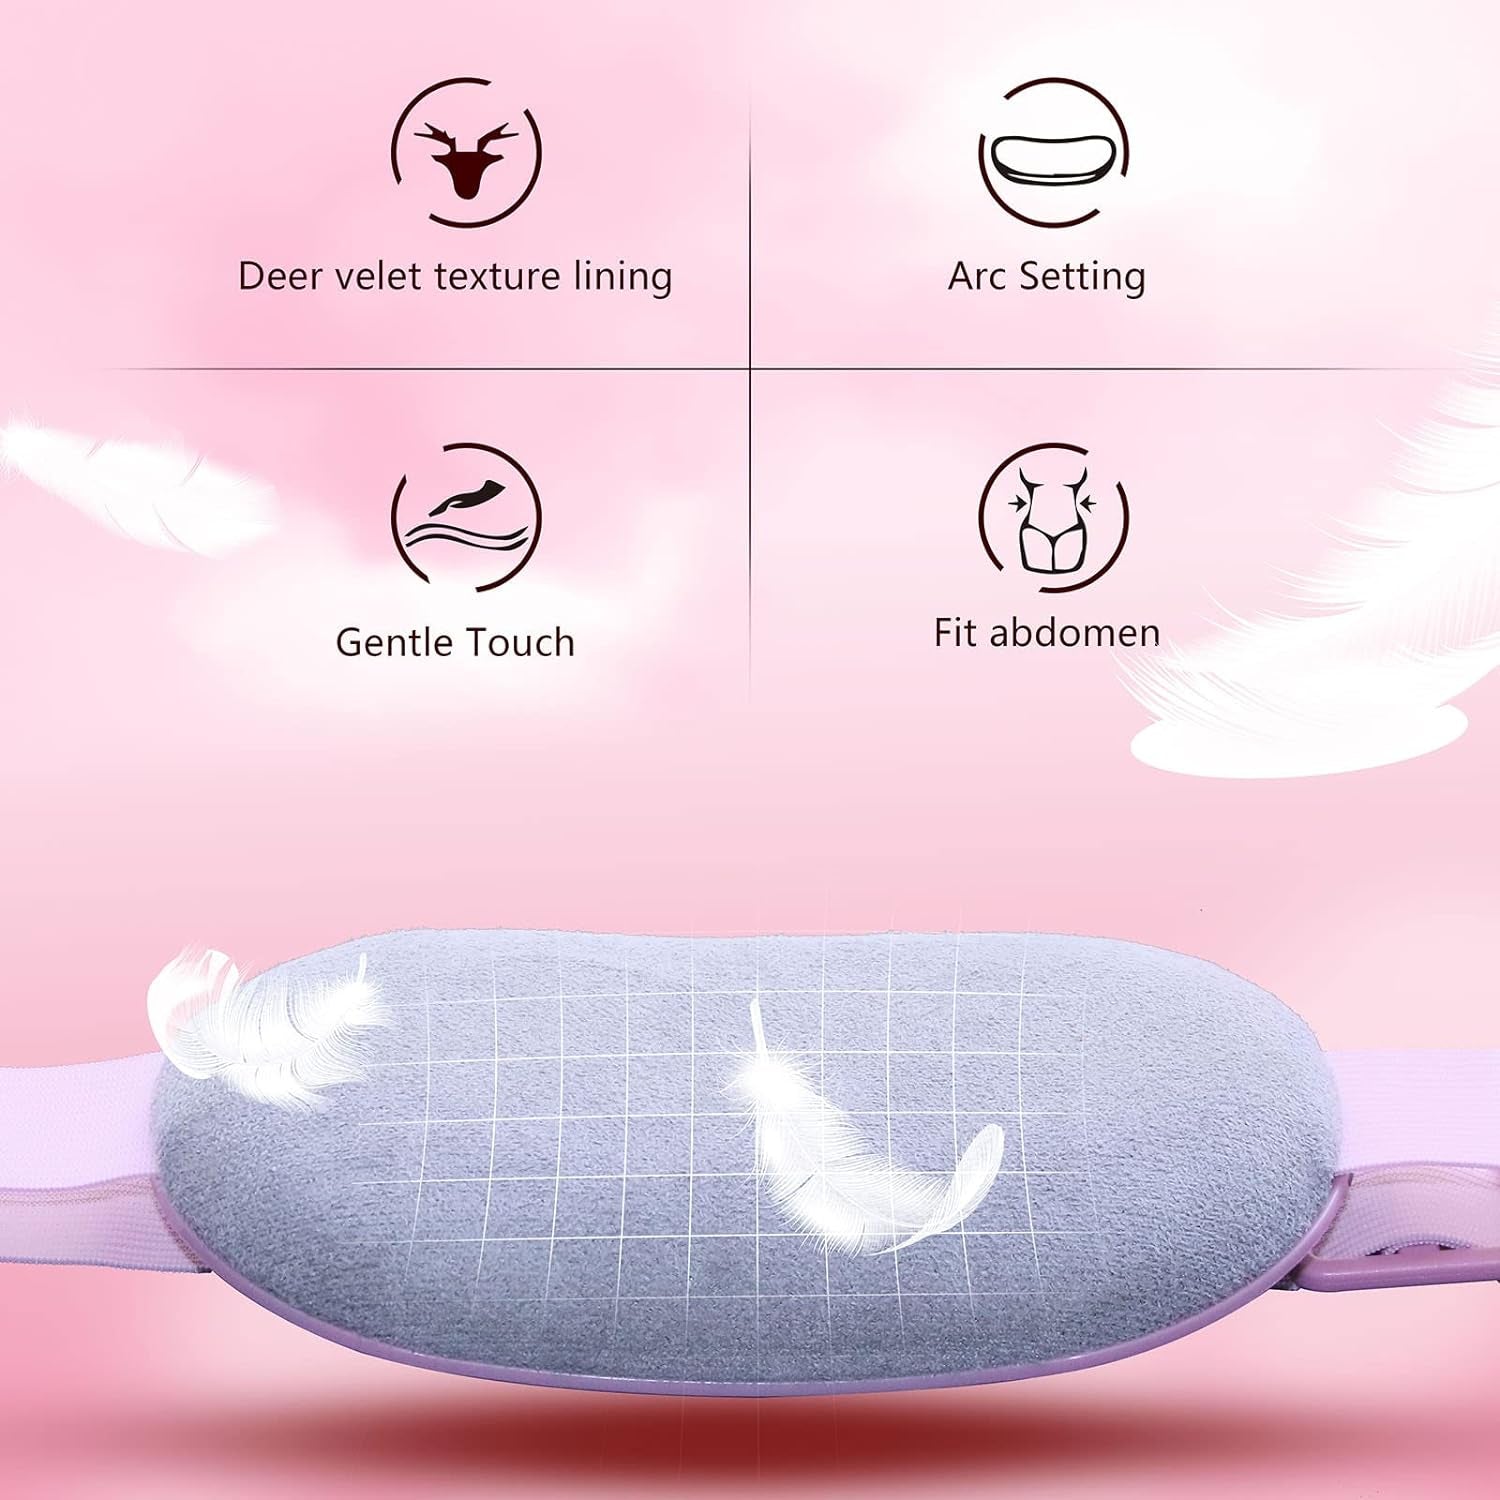 "Ultimate Portable Heating Pad for Quick Pain Relief - 3 Heat Levels, 3 Vibration Massage Modes - Perfect for Women and Girls - Fast Electric Heating - Stylish Pink Design"